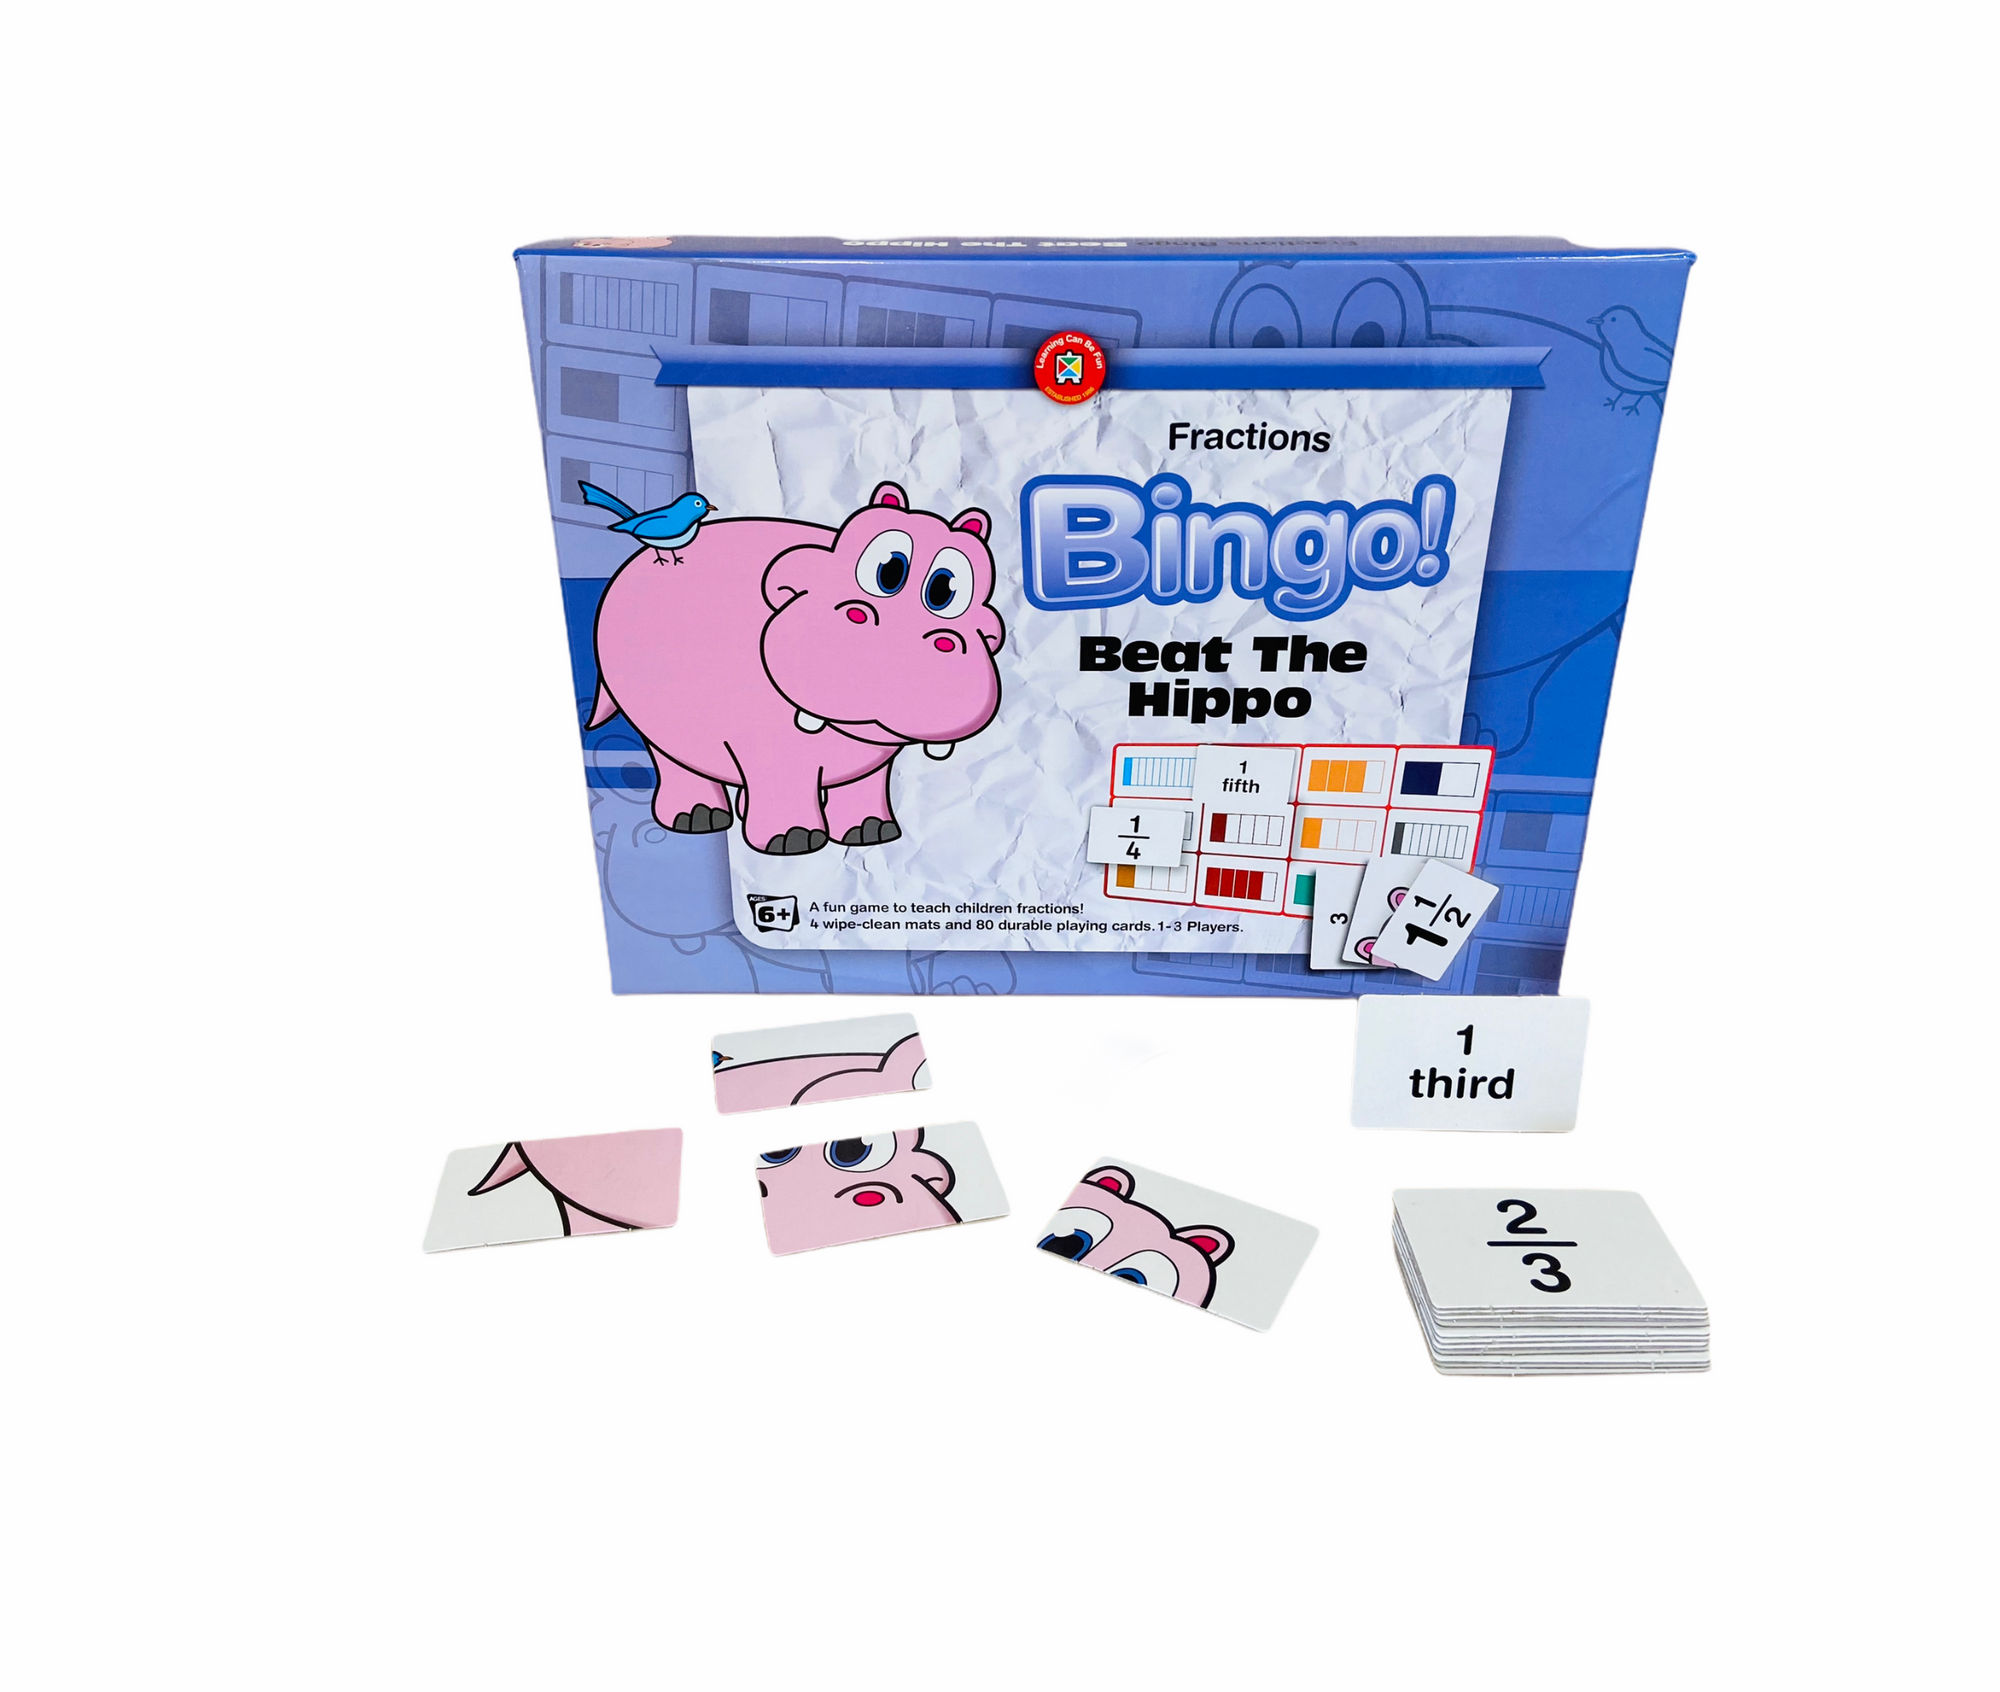 Beat the Hippo Bingo! - Fractions box and cards in front